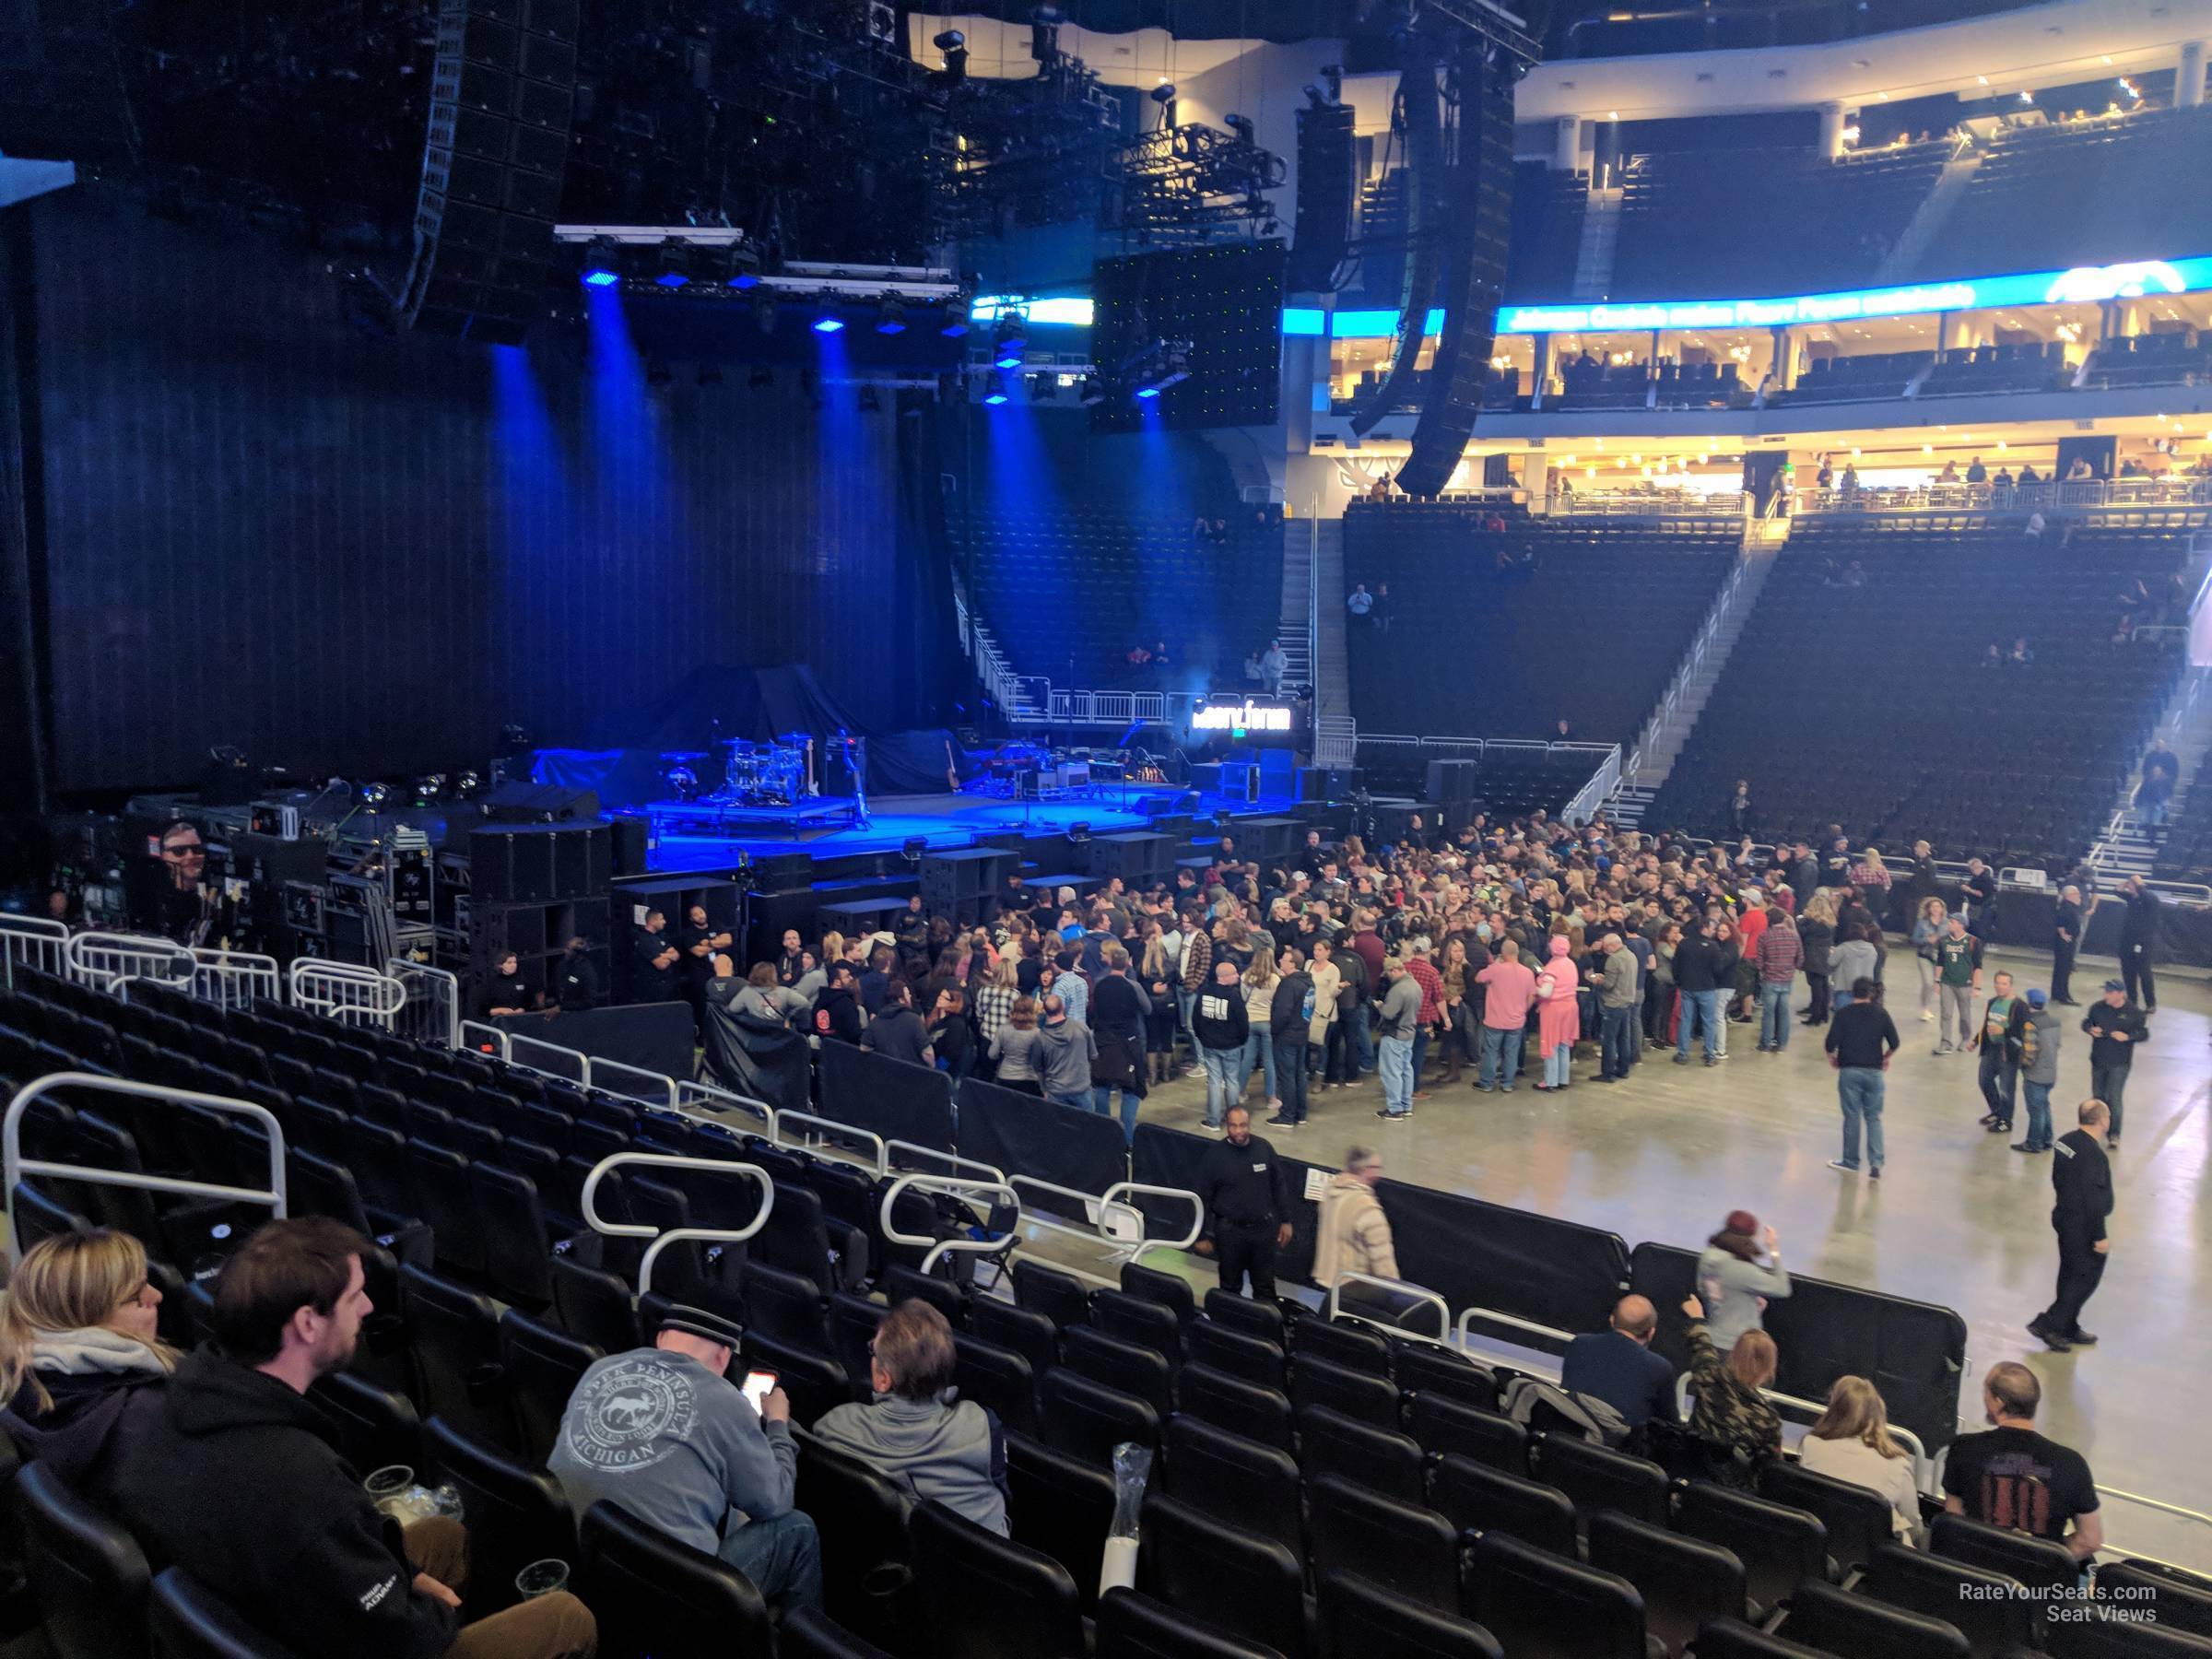 section 106, row 11 seat view  for concert - fiserv forum